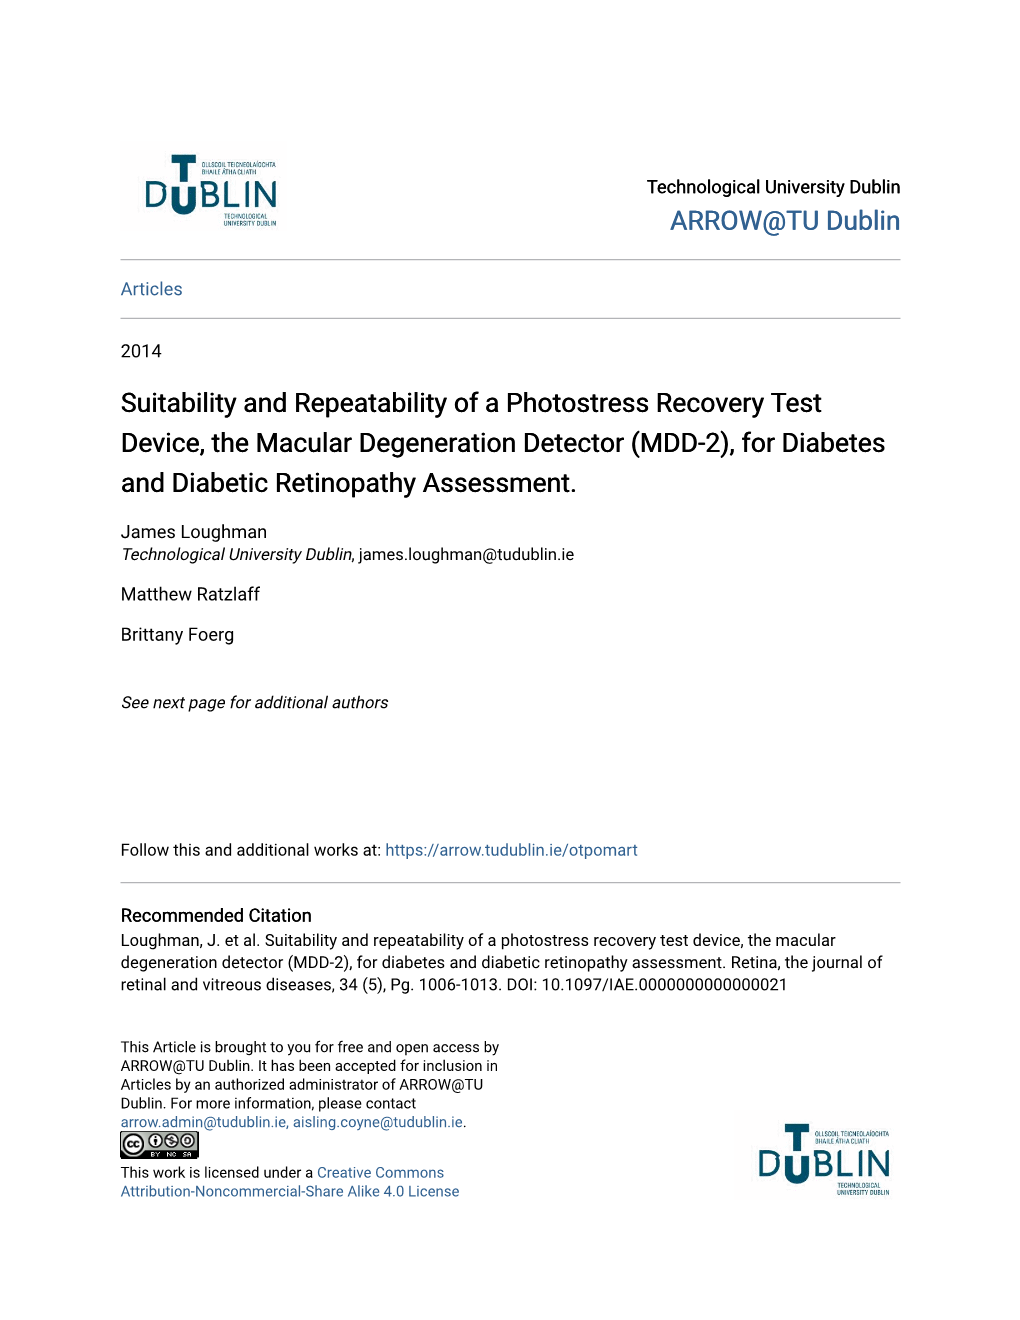 Suitability and Repeatability of a Photostress Recovery Test Device, the Macular Degeneration Detector (MDD-2), for Diabetes and Diabetic Retinopathy Assessment